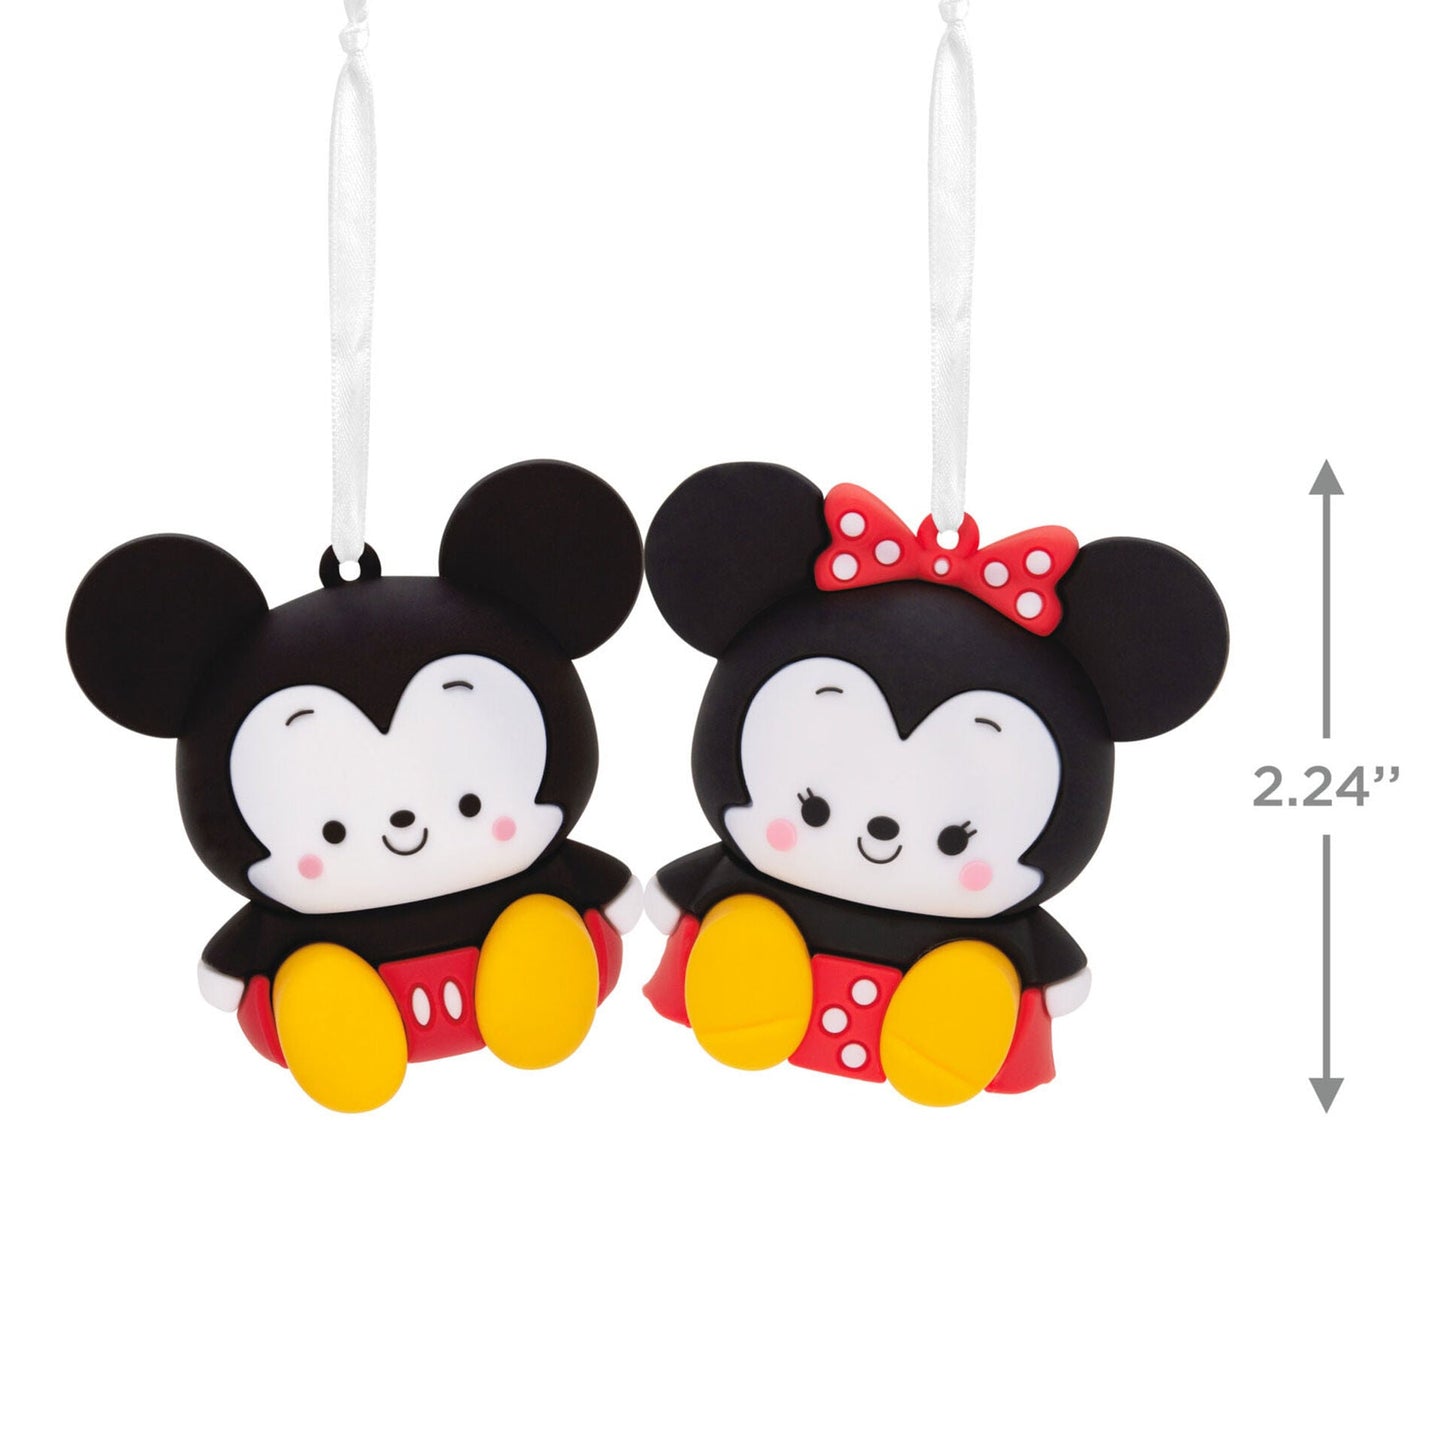 Better Together Disney Mickey and Minnie Magnetic Hallmark Ornaments, Set of 2